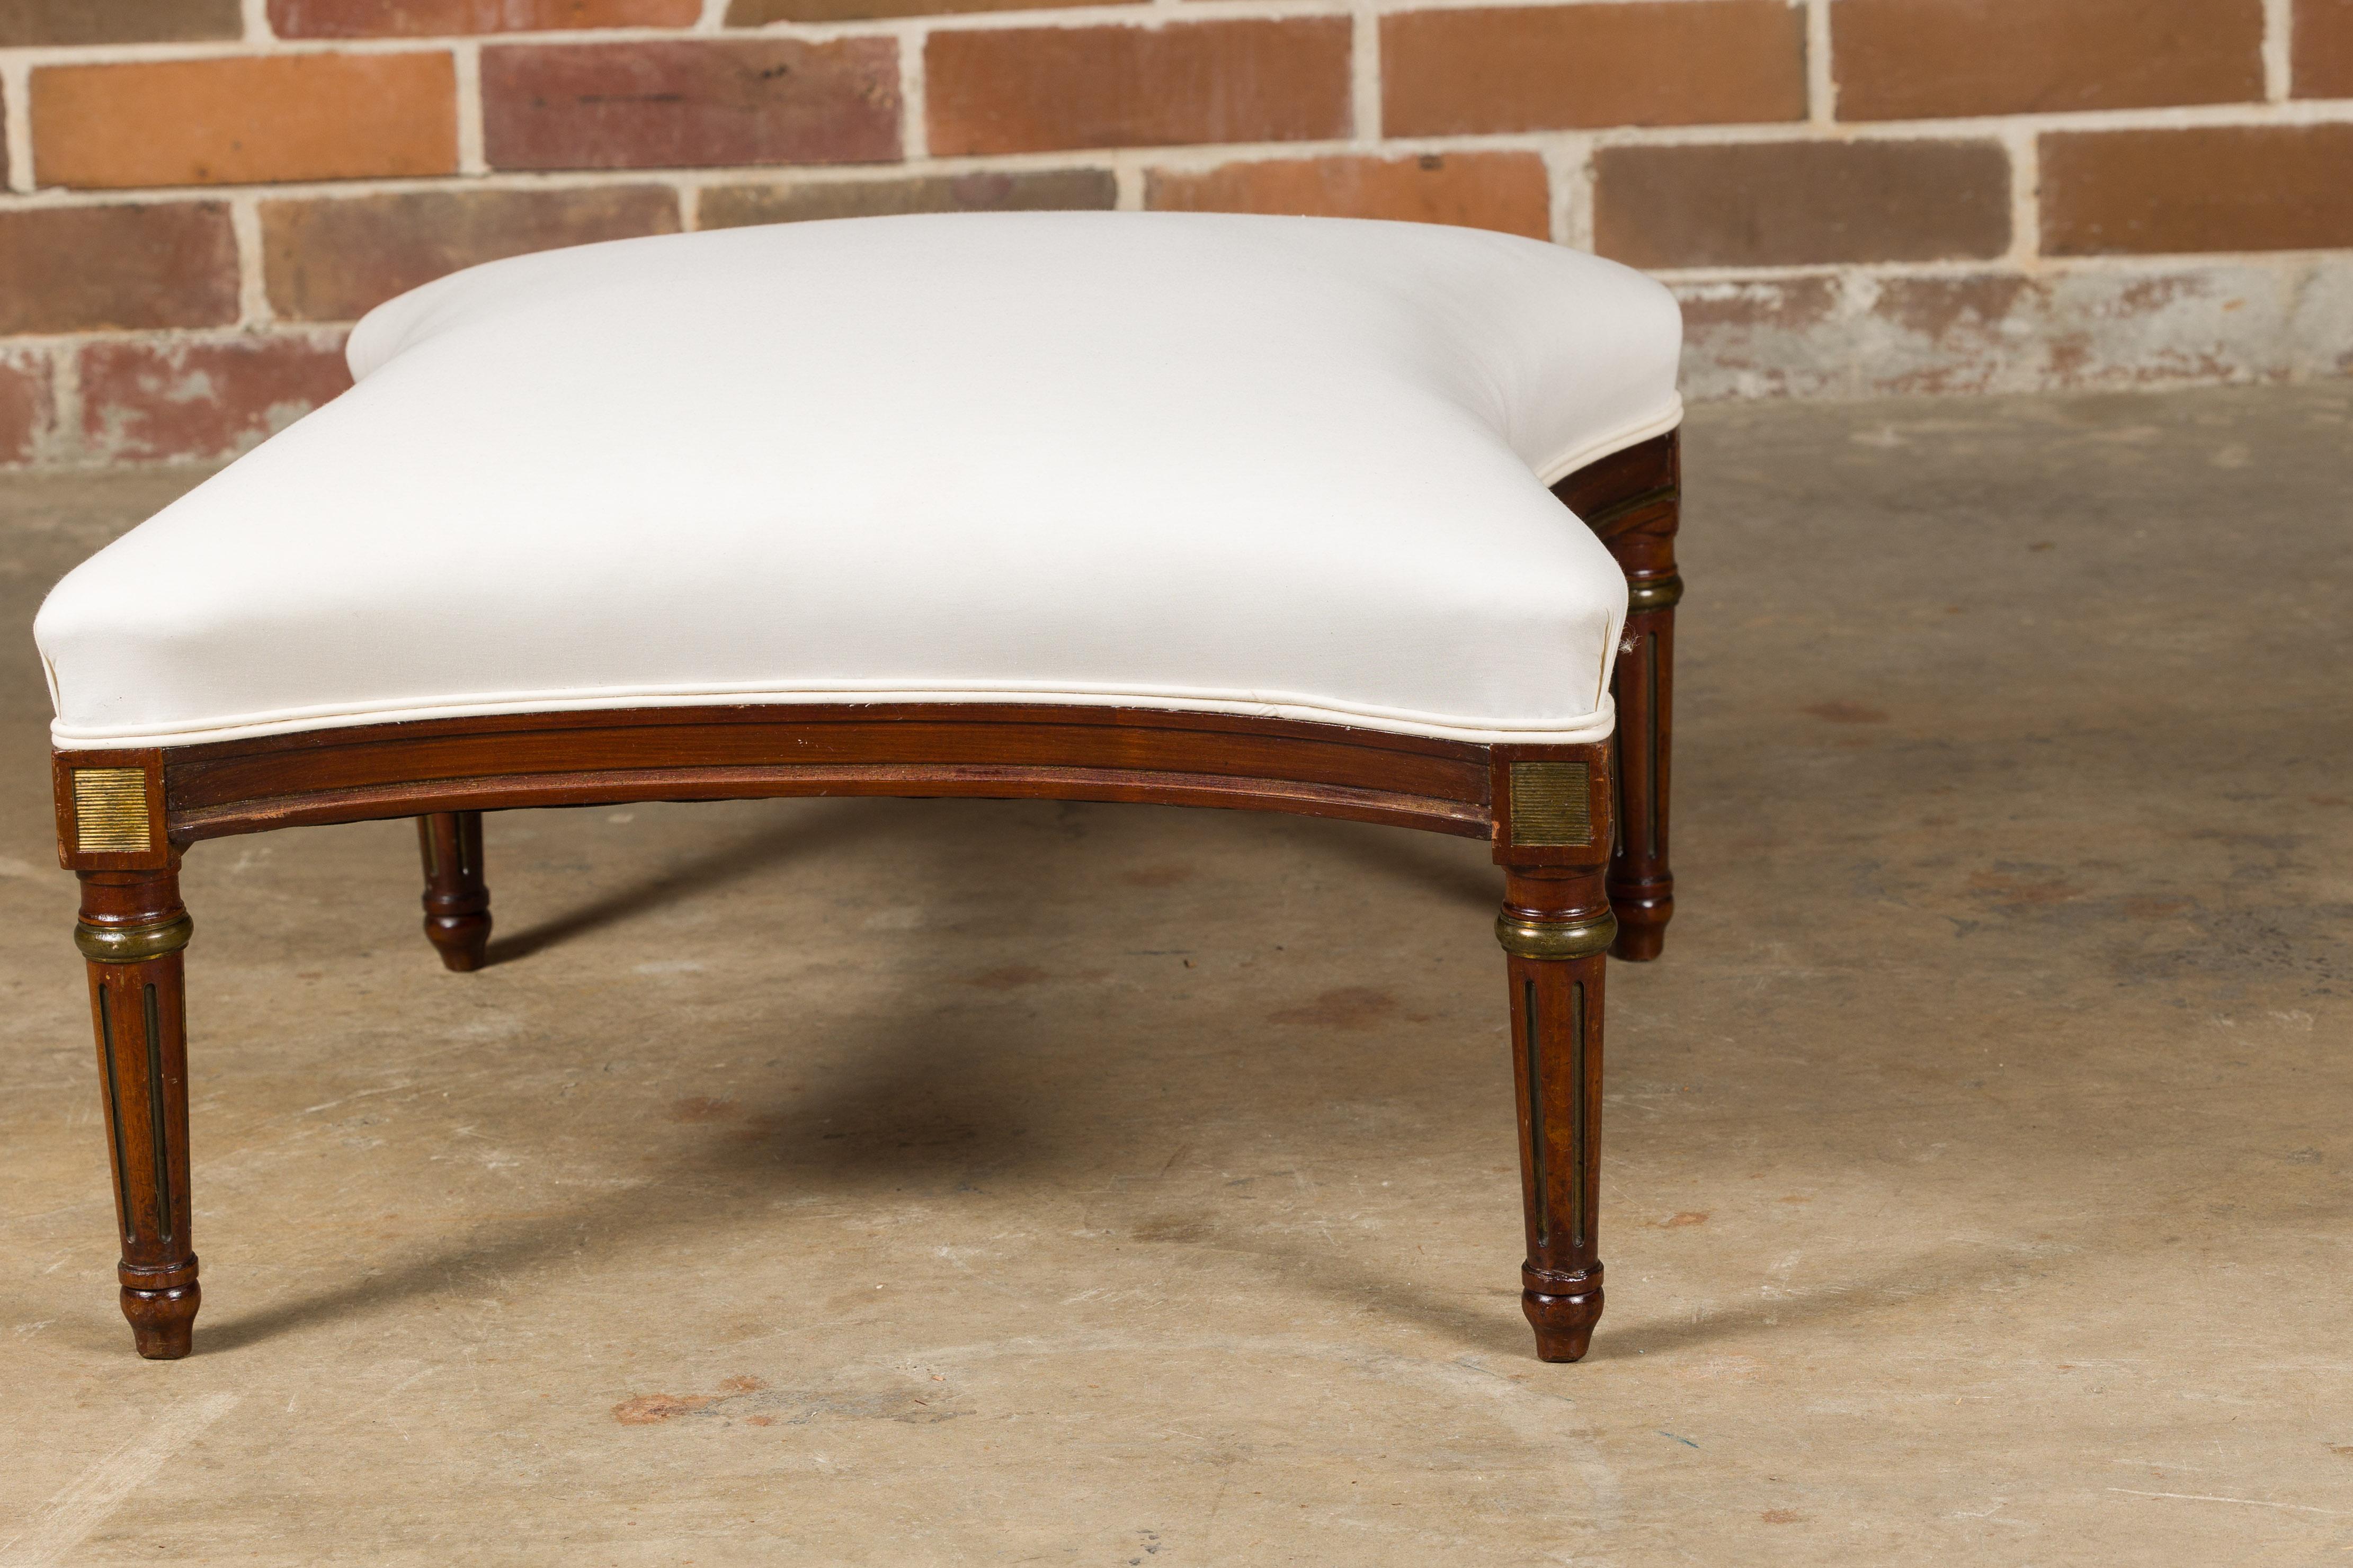 20th Century Louis XVI Style French Upholstered Ottoman with Fluted Legs, Gilded Accents For Sale